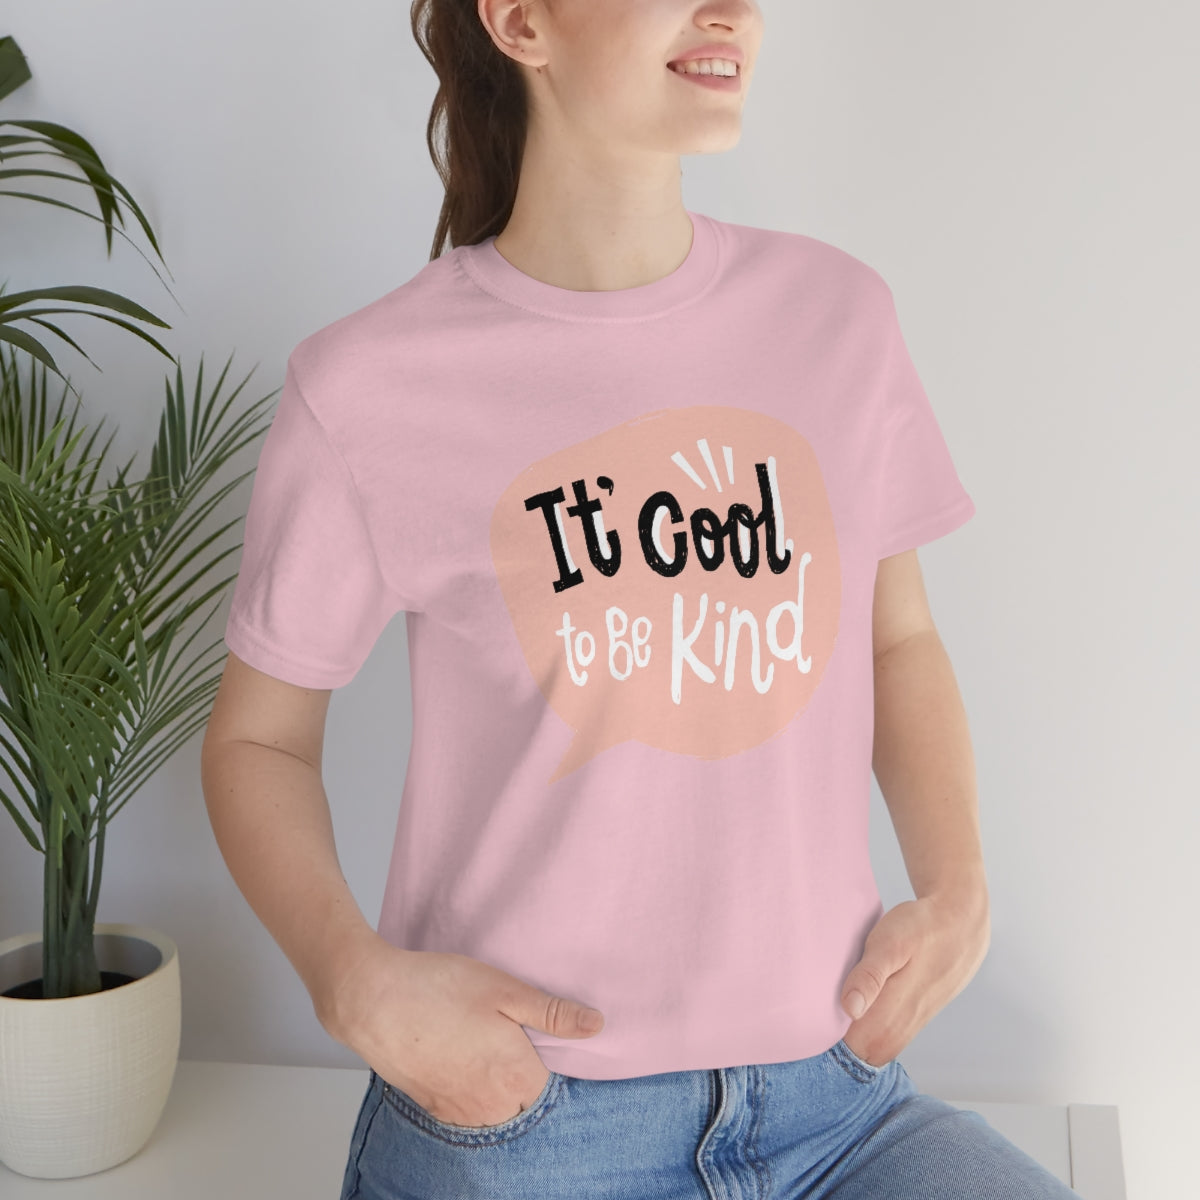 Unisex Jersey Short Sleeve Tee "Pink shirt DAY It's cool to be kind"